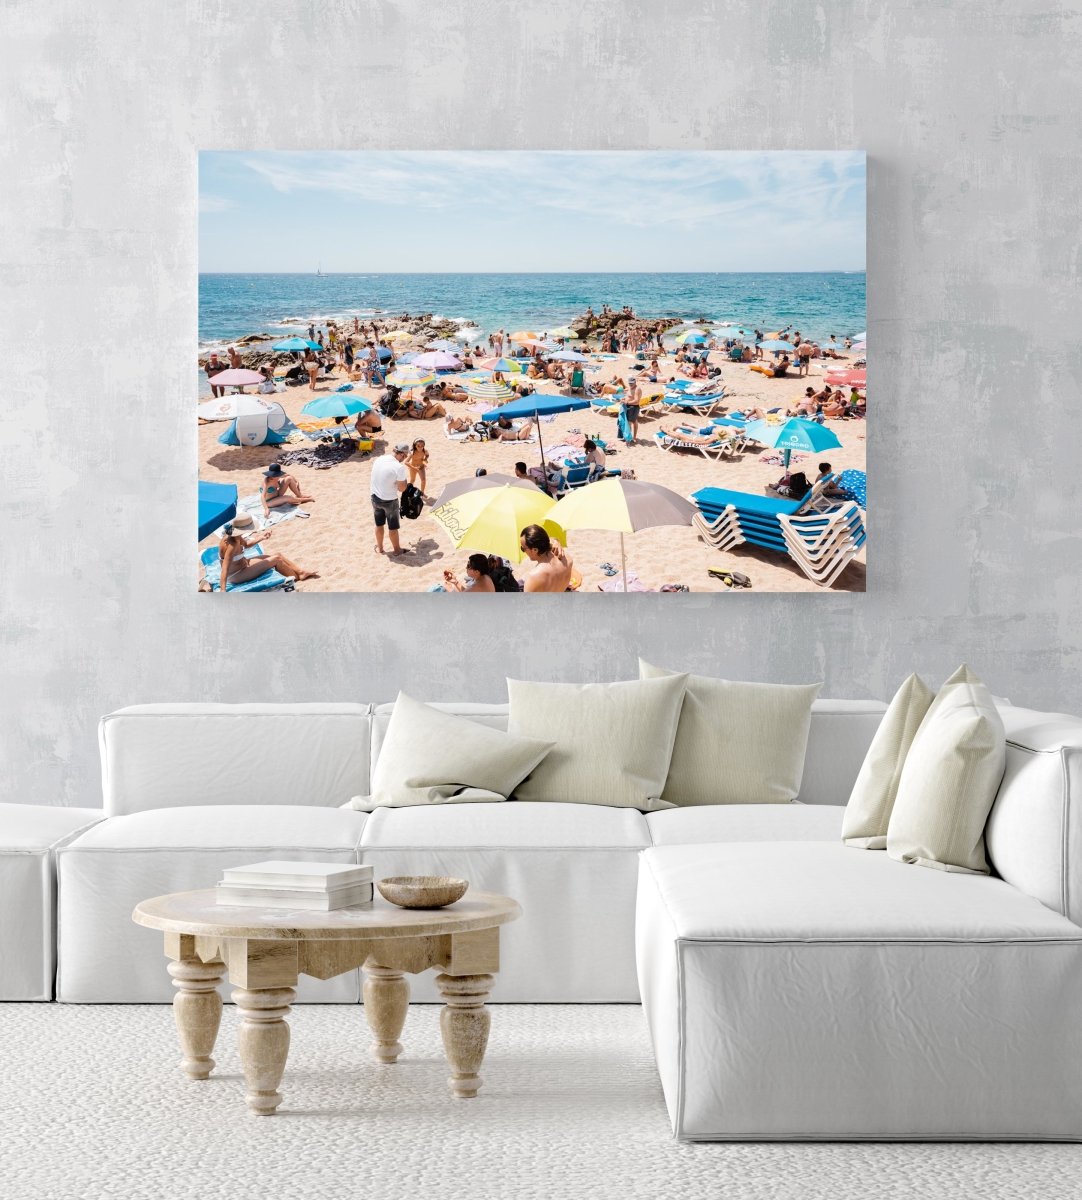 Lloret de Mar beach full of people and umbrellas in an acrylic/perspex frame